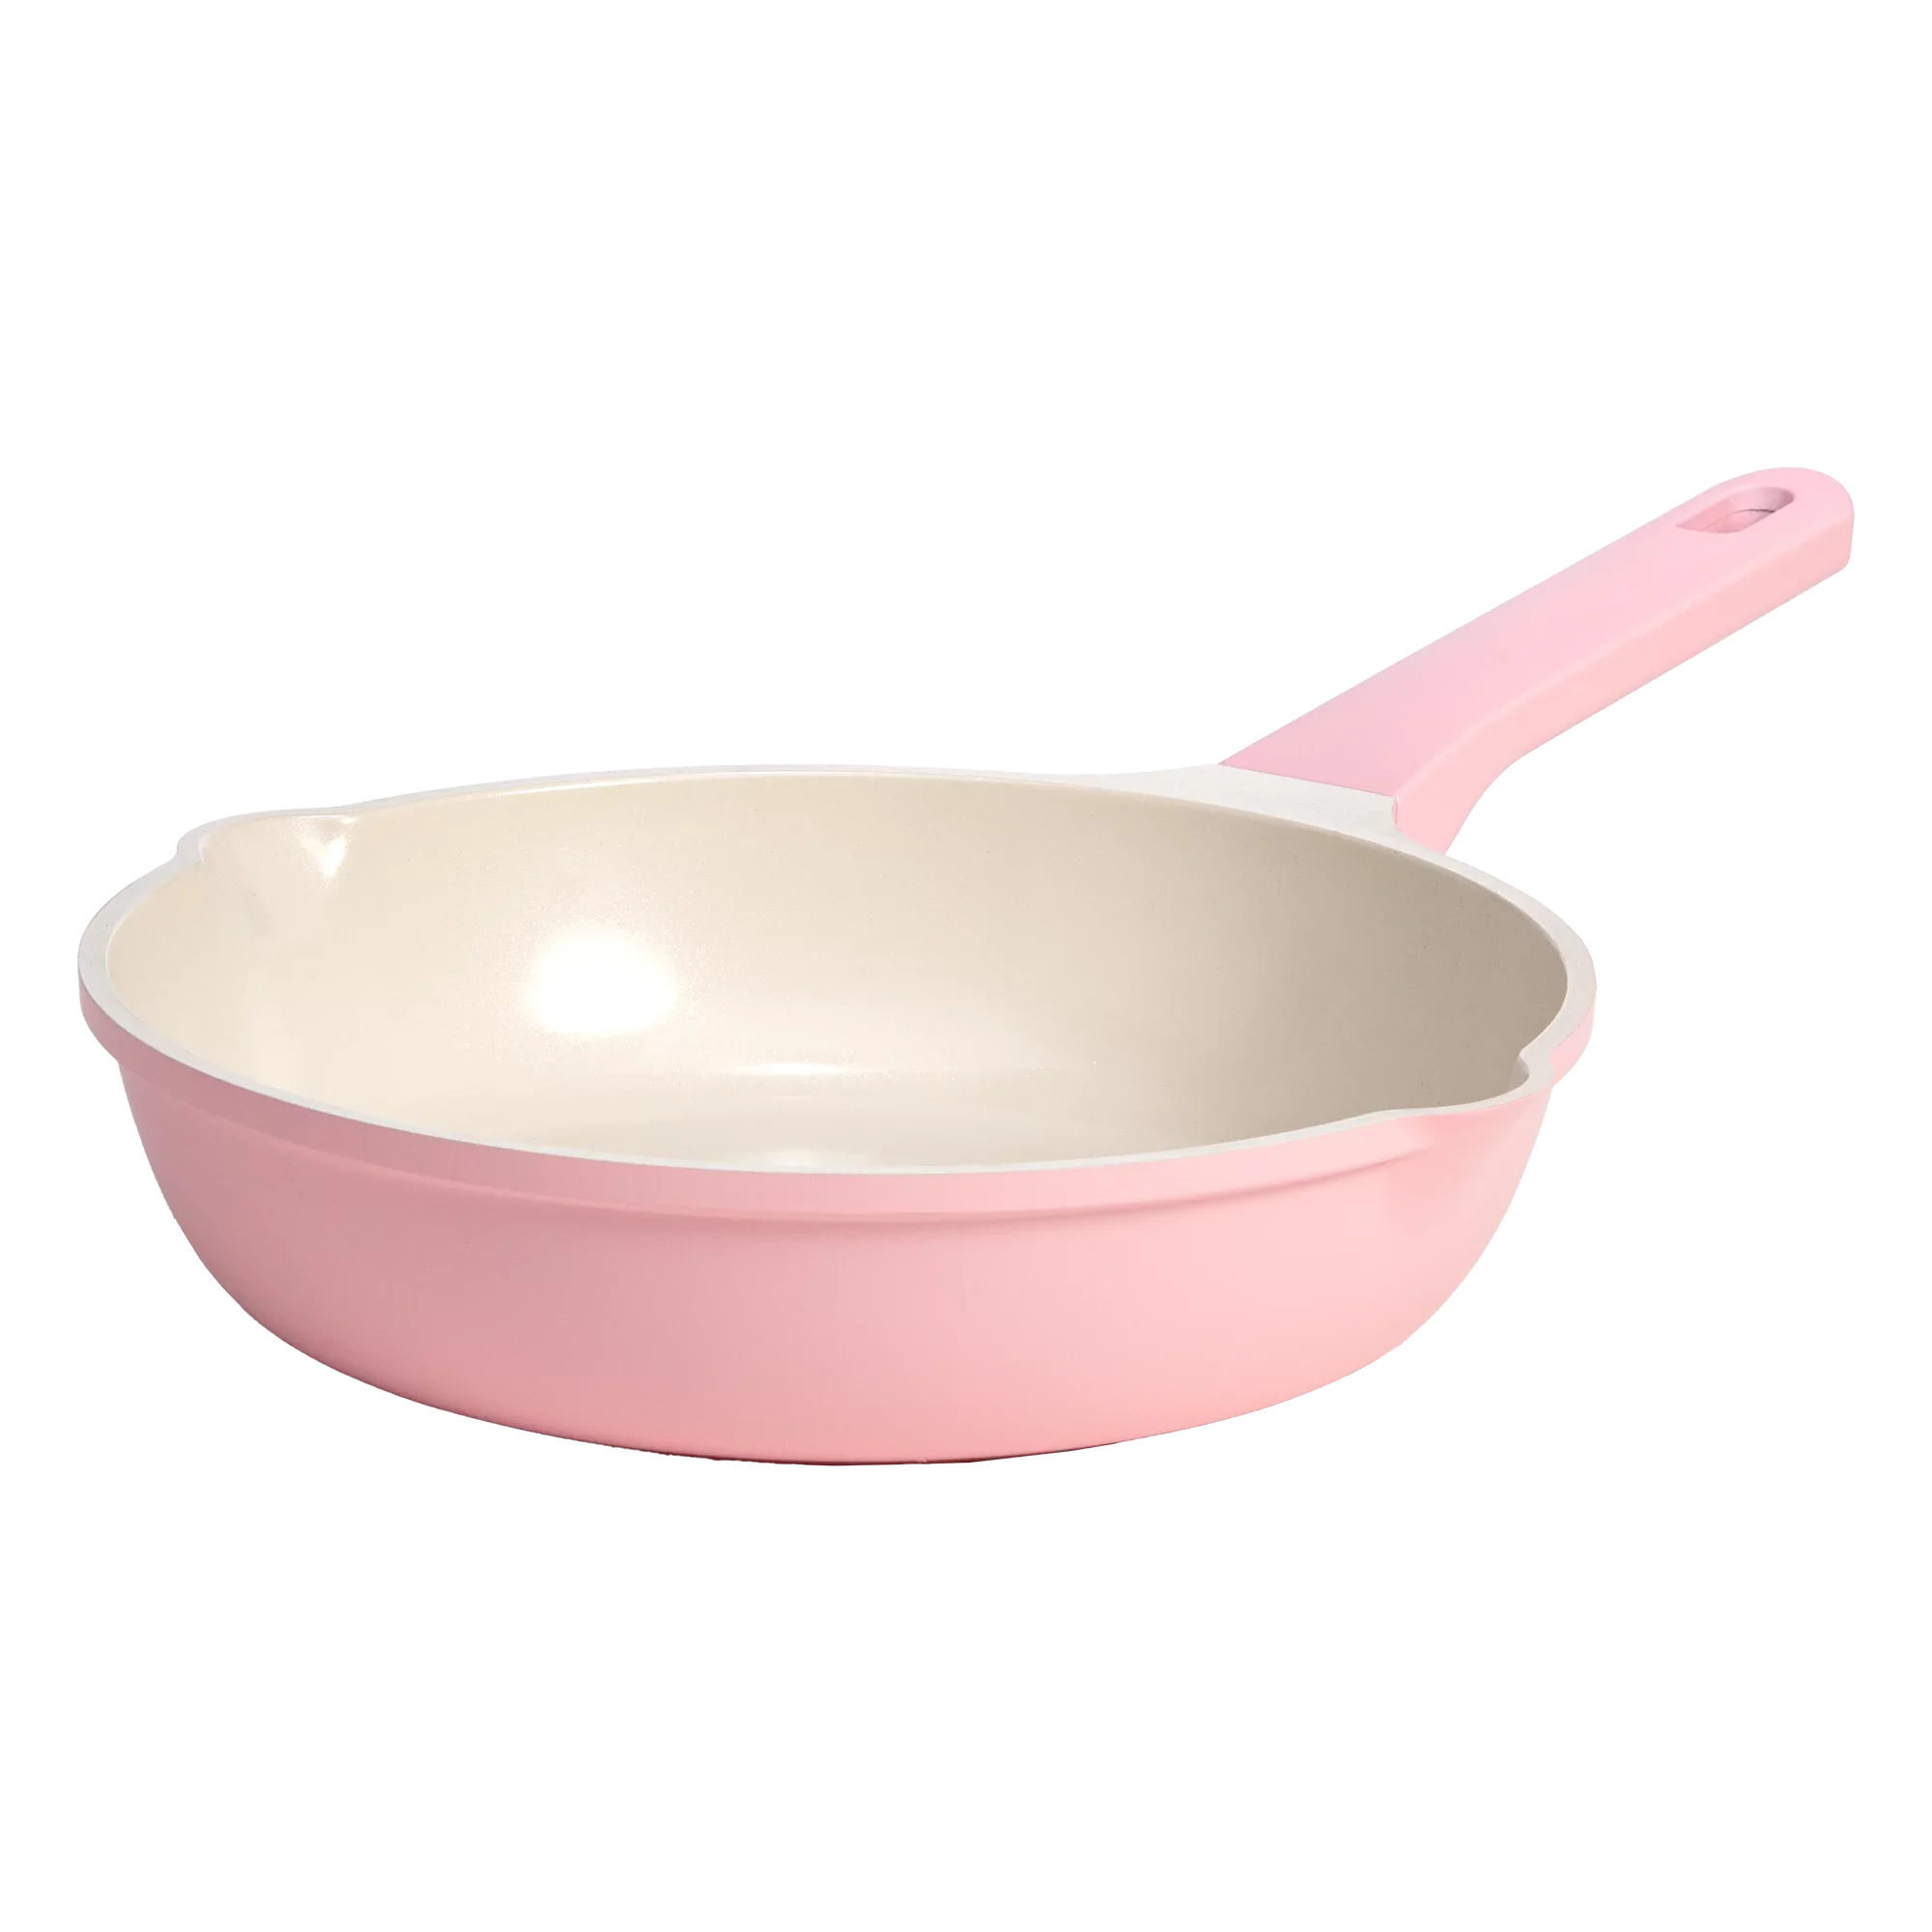 Wholesale prices with free shipping all over United States Paris Hilton Nonstick Fry Pan with Clean Ceramic Nonstick Coating, 10 inch, Pink - Steven Deals